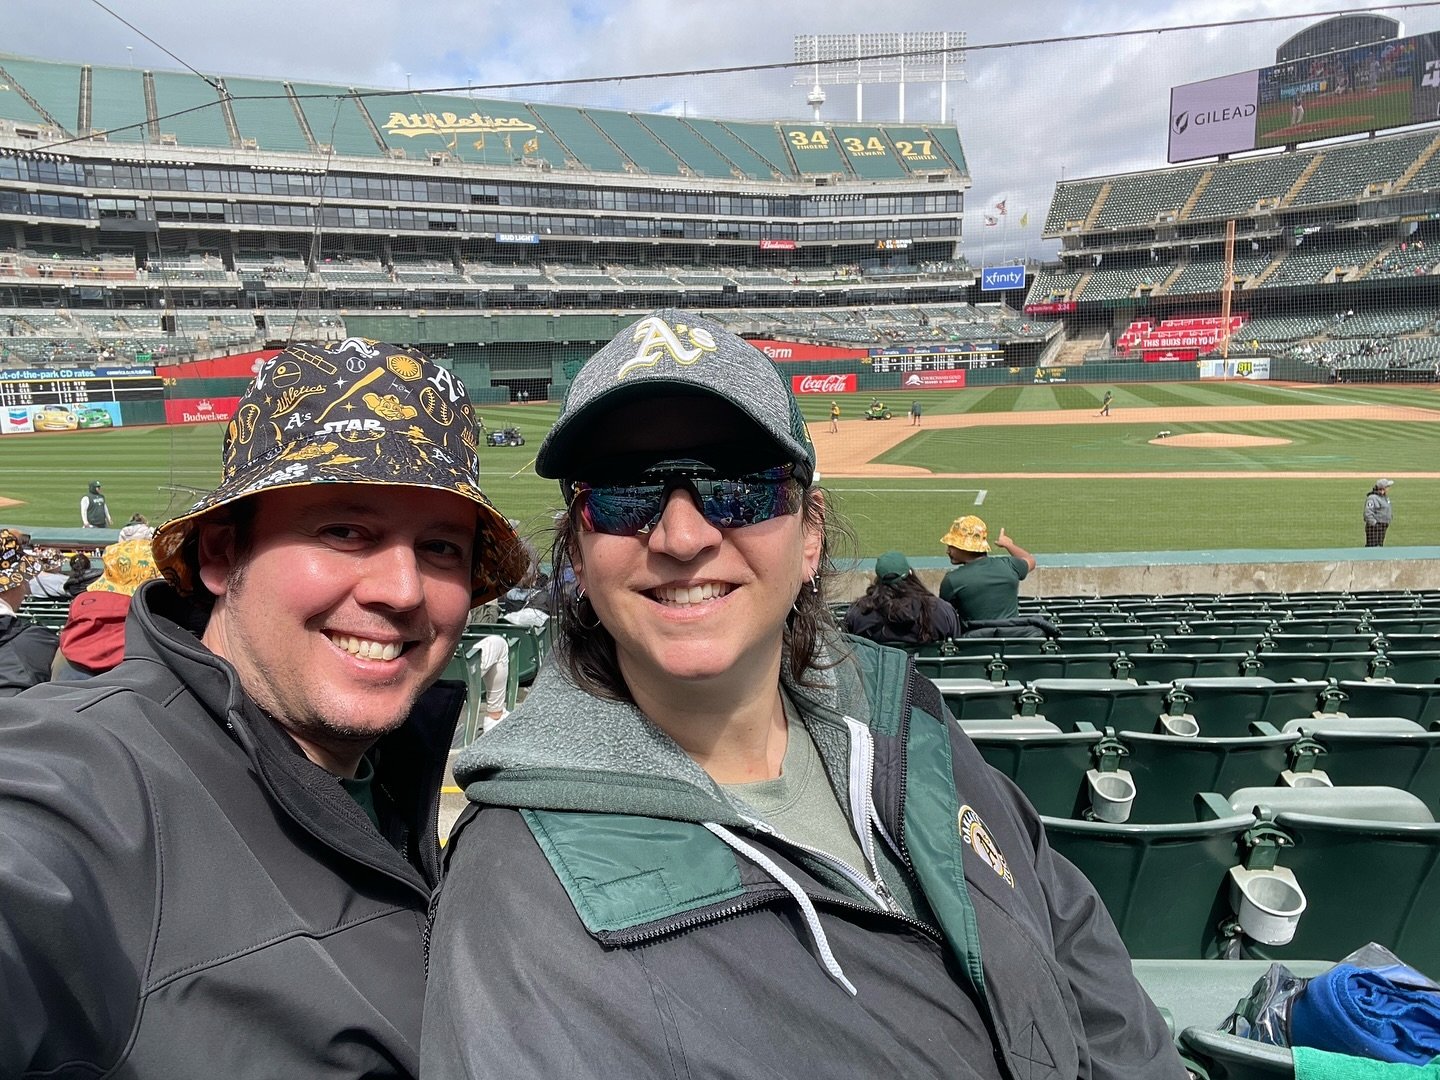 #atthecoliseum for the A&rsquo;s vs. Miami Marlins game today. After a 3 hour rain delay, the sun is peaking out. Let&rsquo;s go Oakland!